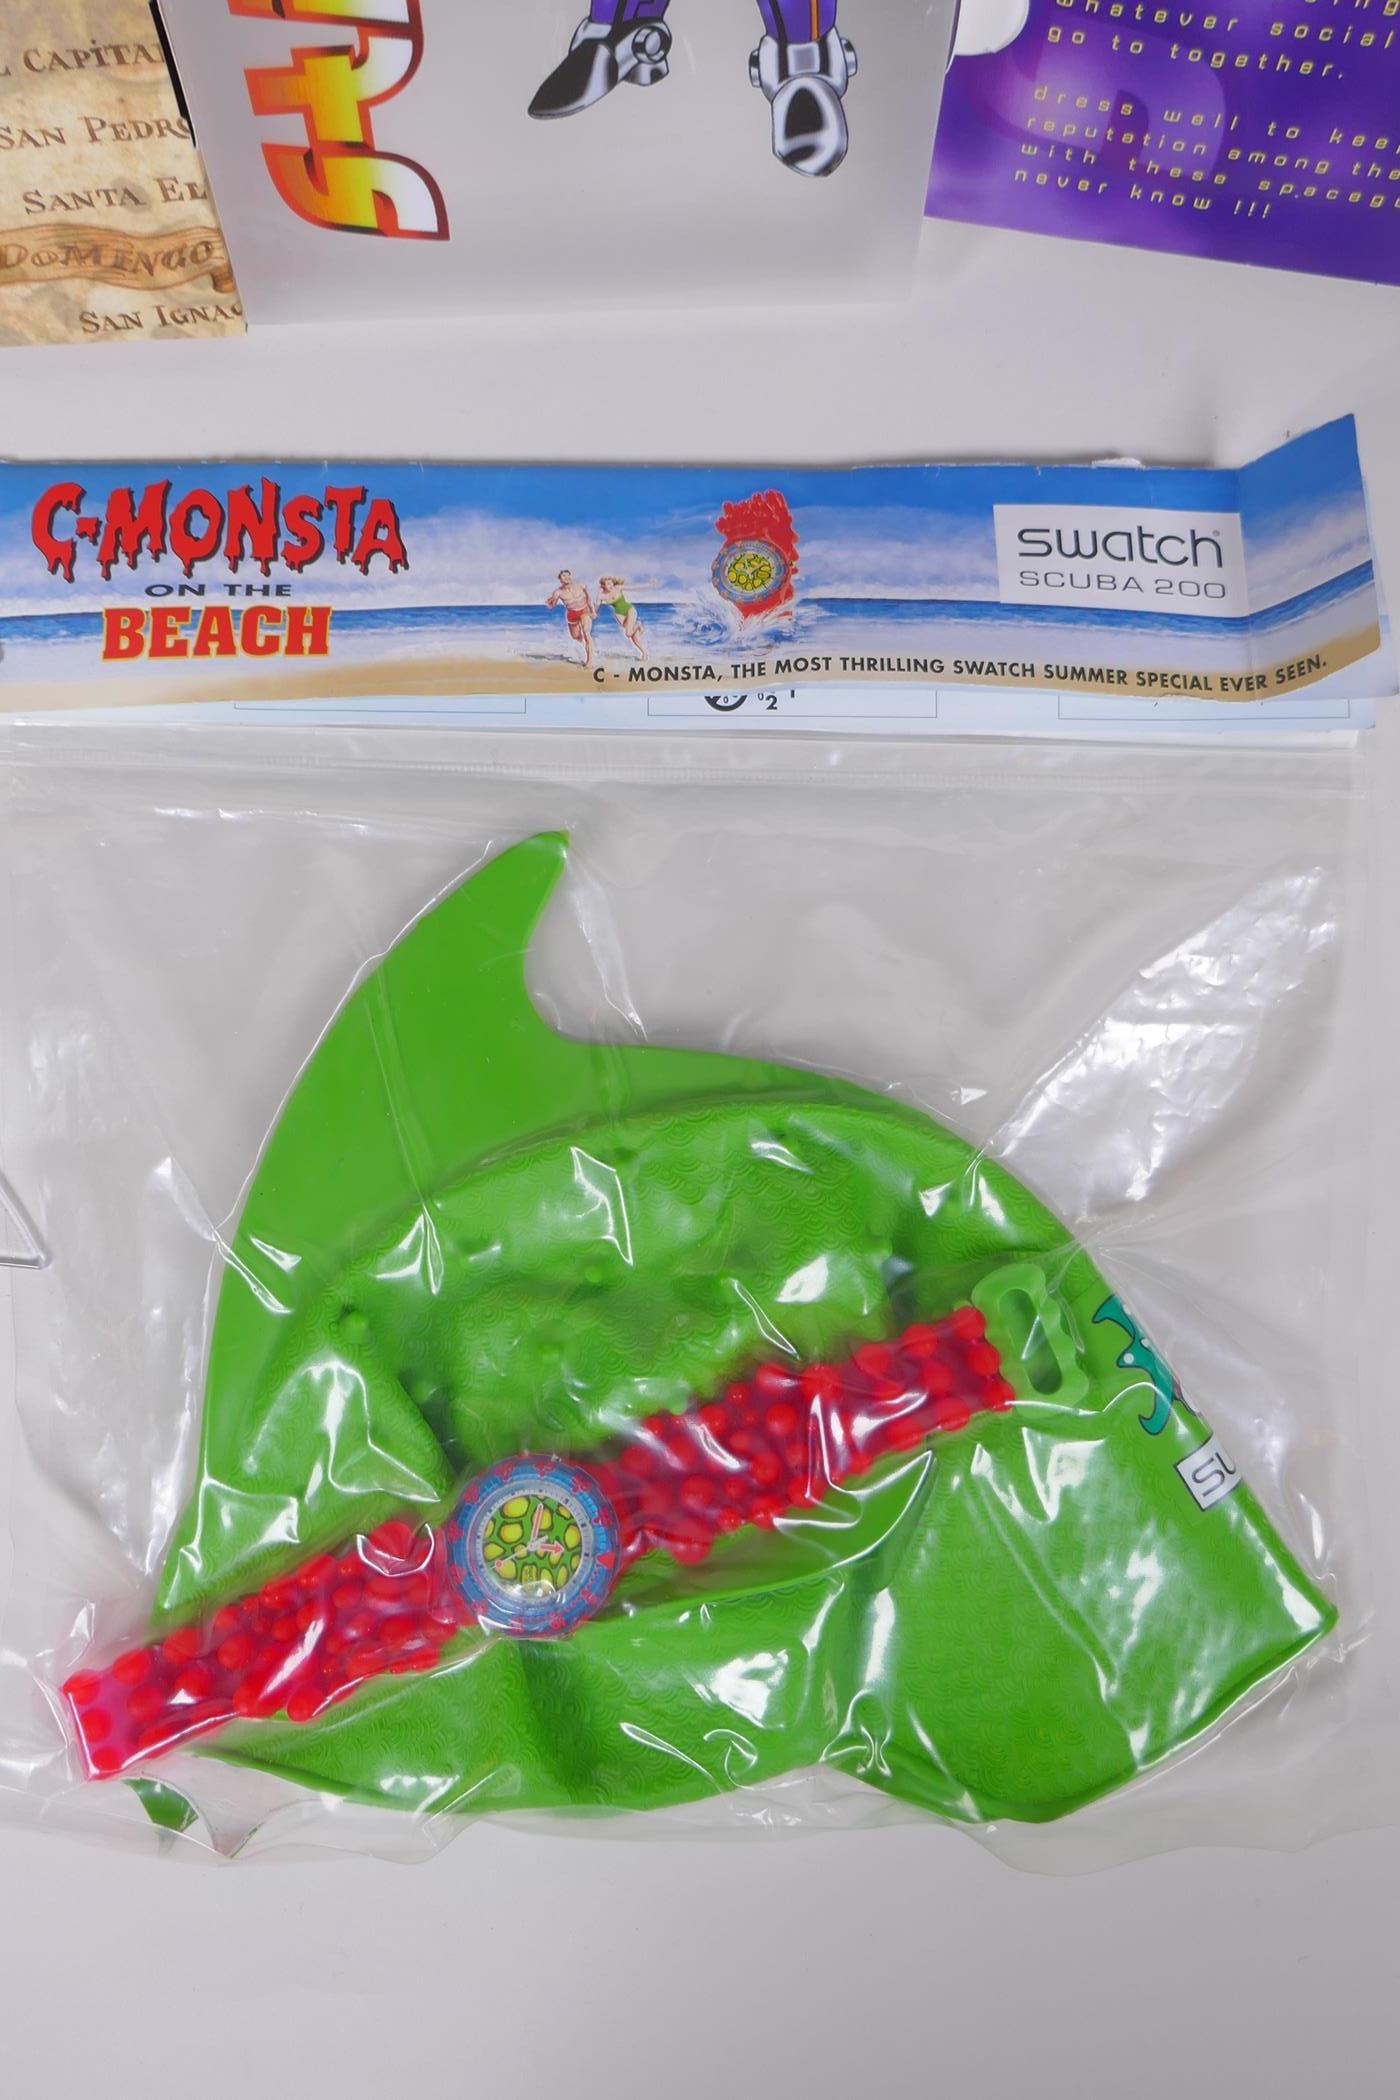 A collection of Retro Swatch watches including Human Fish 2000, C-Monsta on the Beach (Scuba), - Image 3 of 9